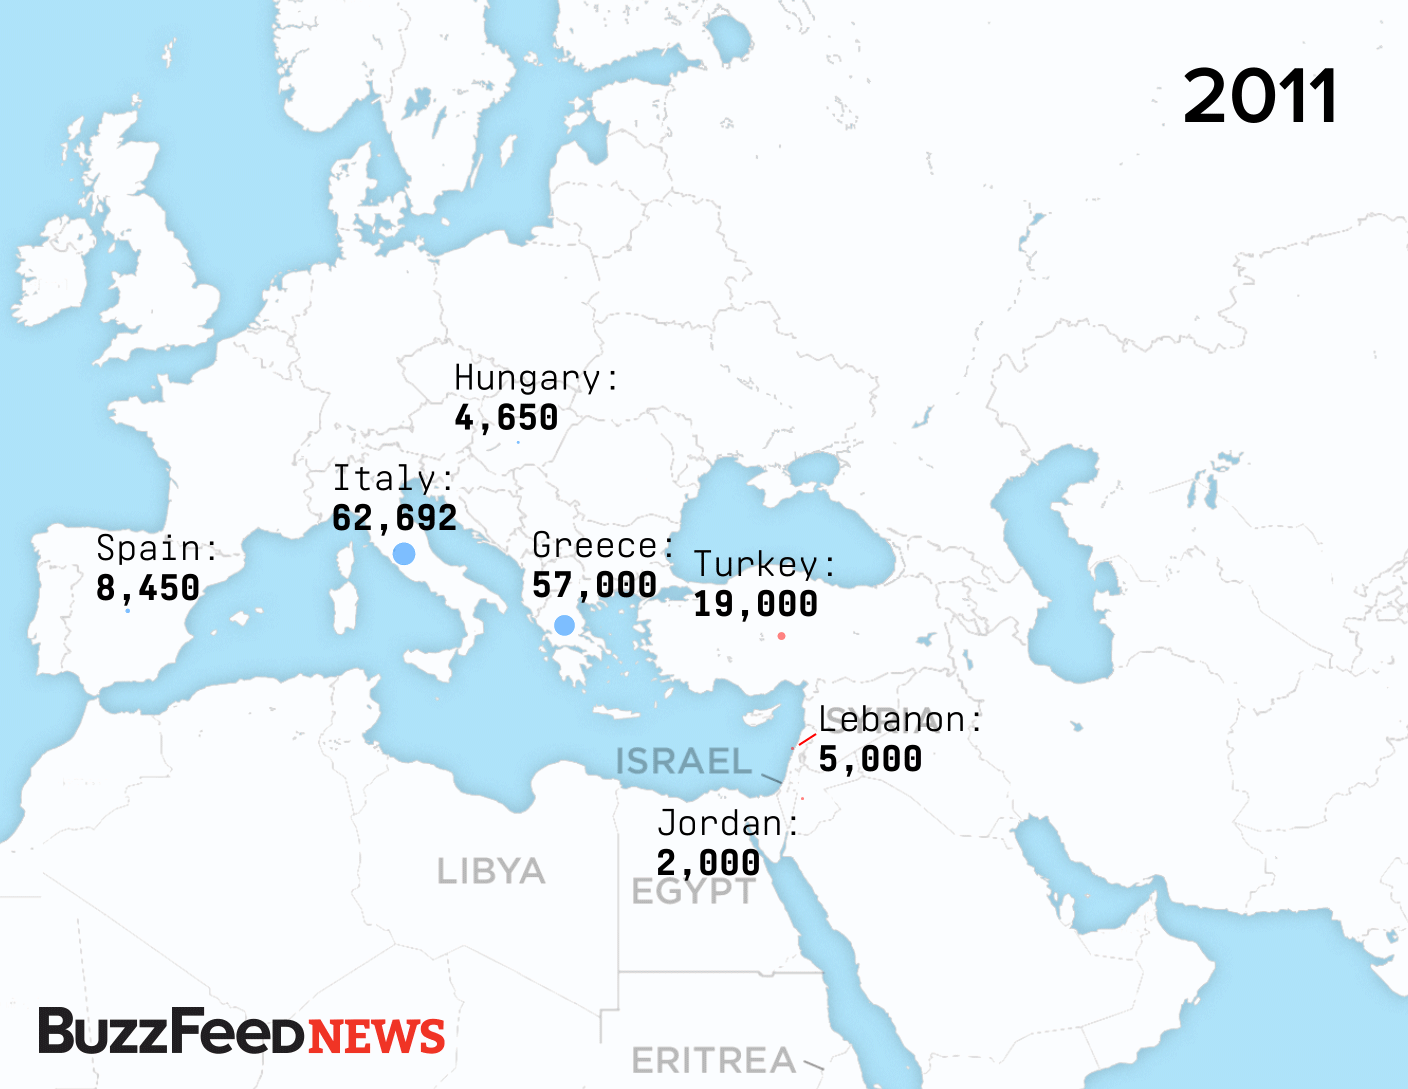 this gif shows just how big the refugee crisis has grown since 2011